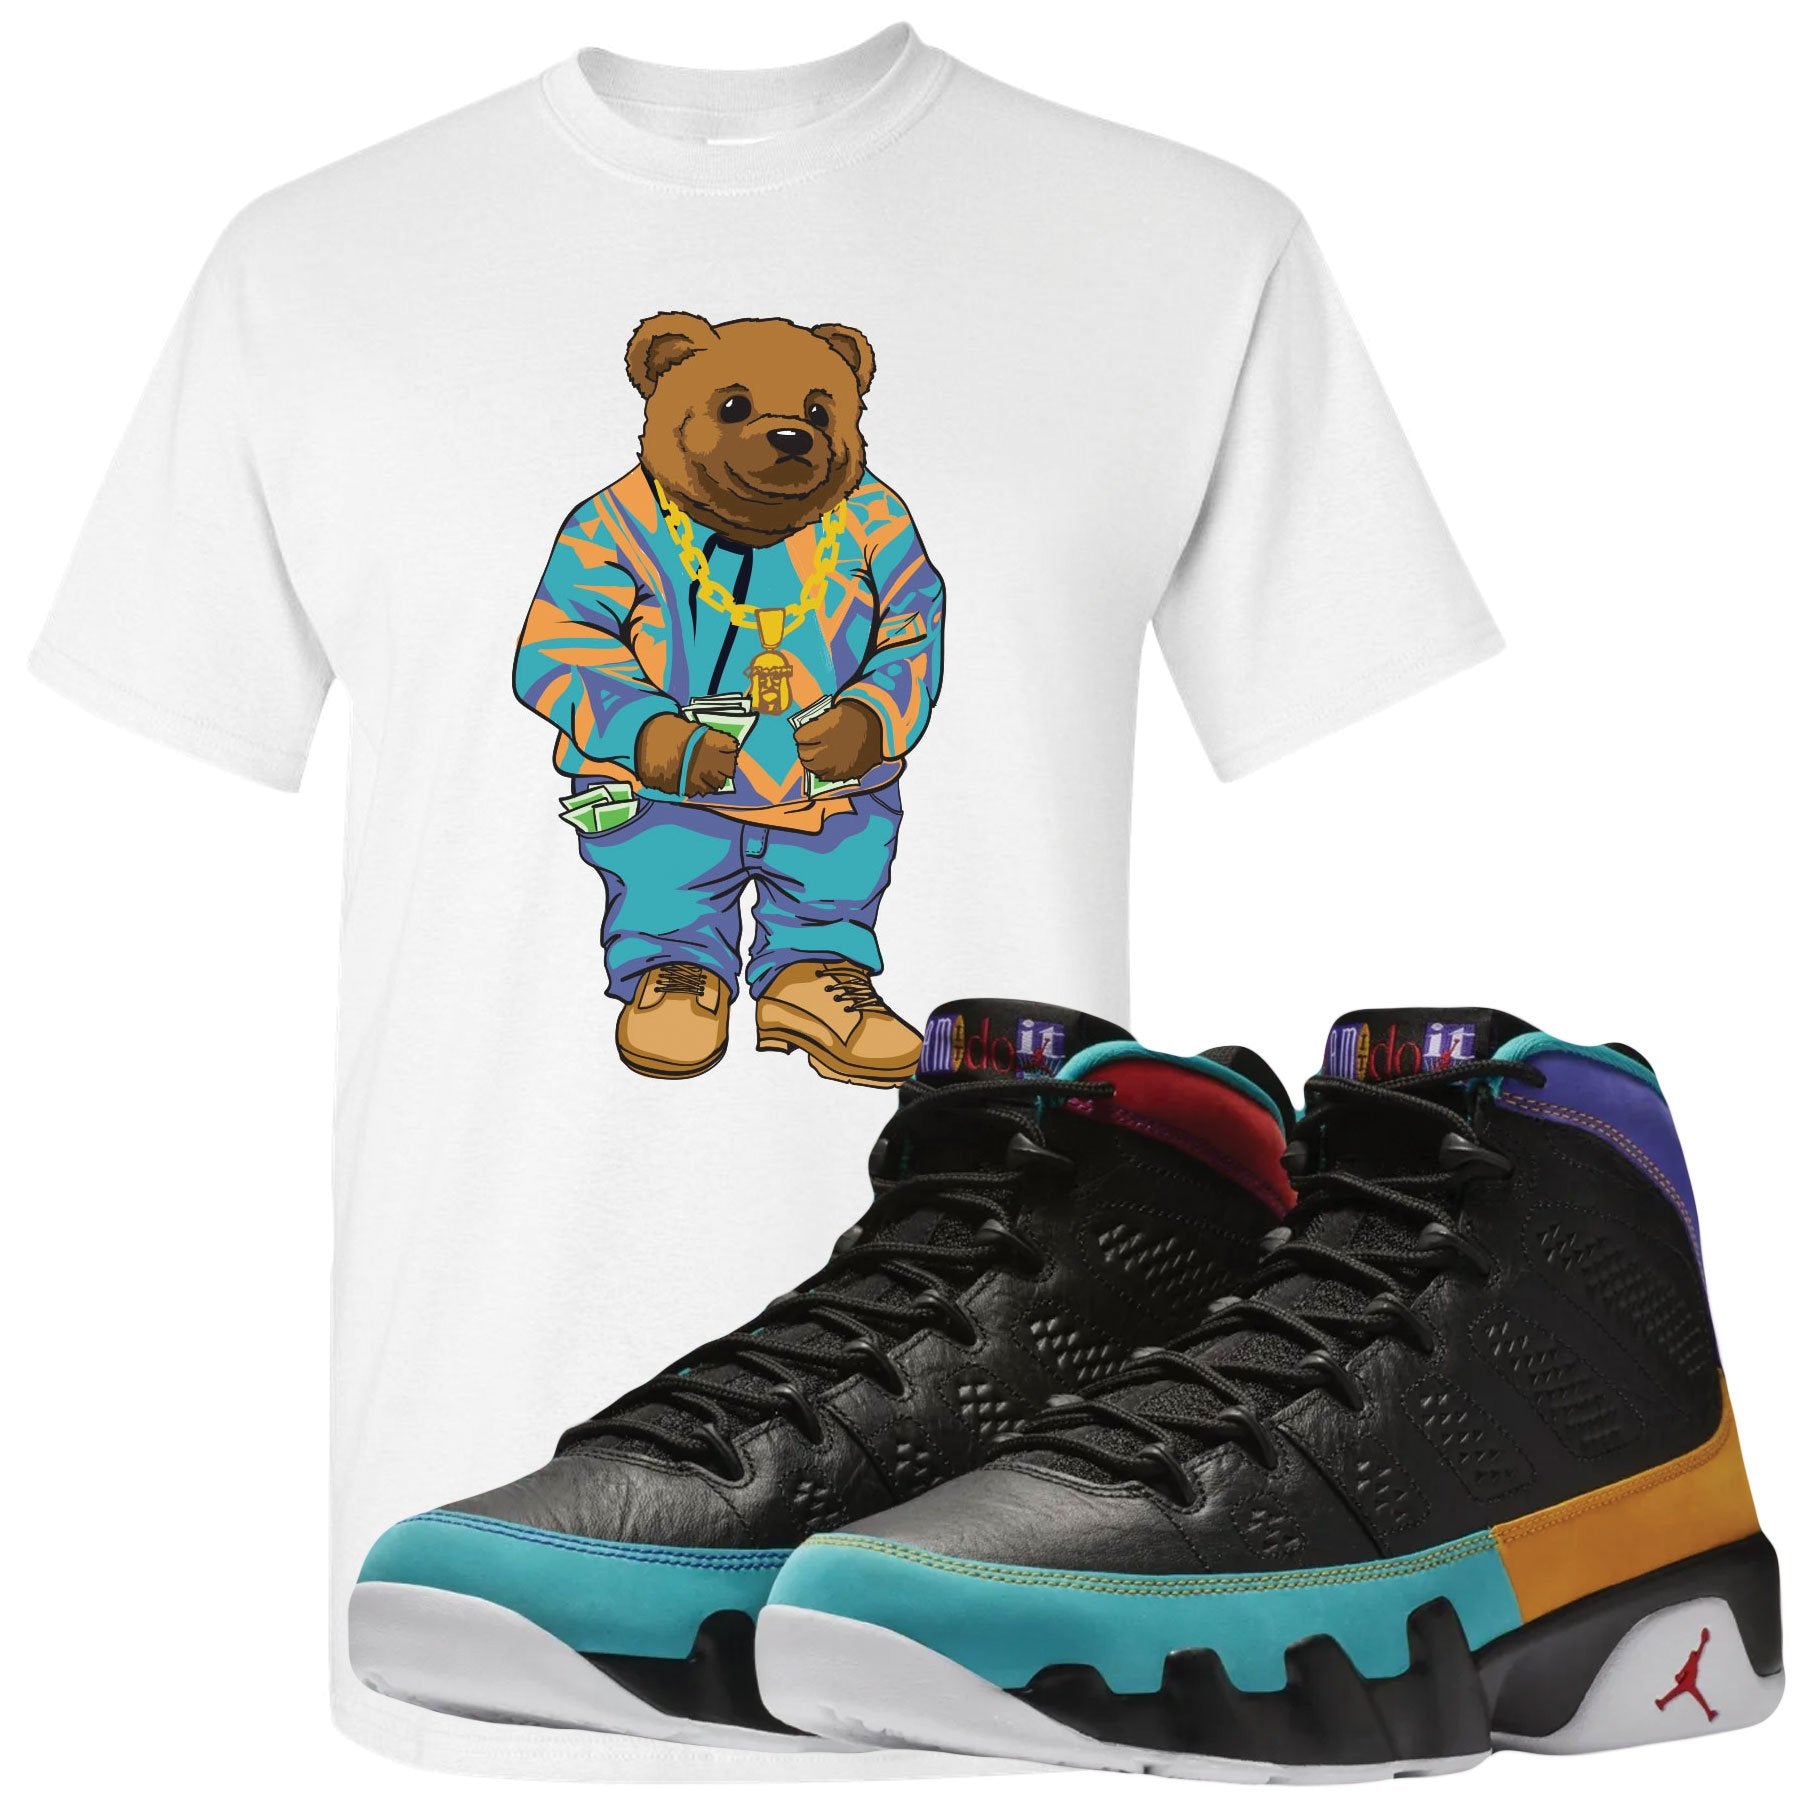 Shop sneaker matching clothing to match your pair of Jordan 9 Dream It Do It Sneakers. This Jordan 9 Dream It Do It sneaker matching item will perfectly match the Dream It Do It 9s.